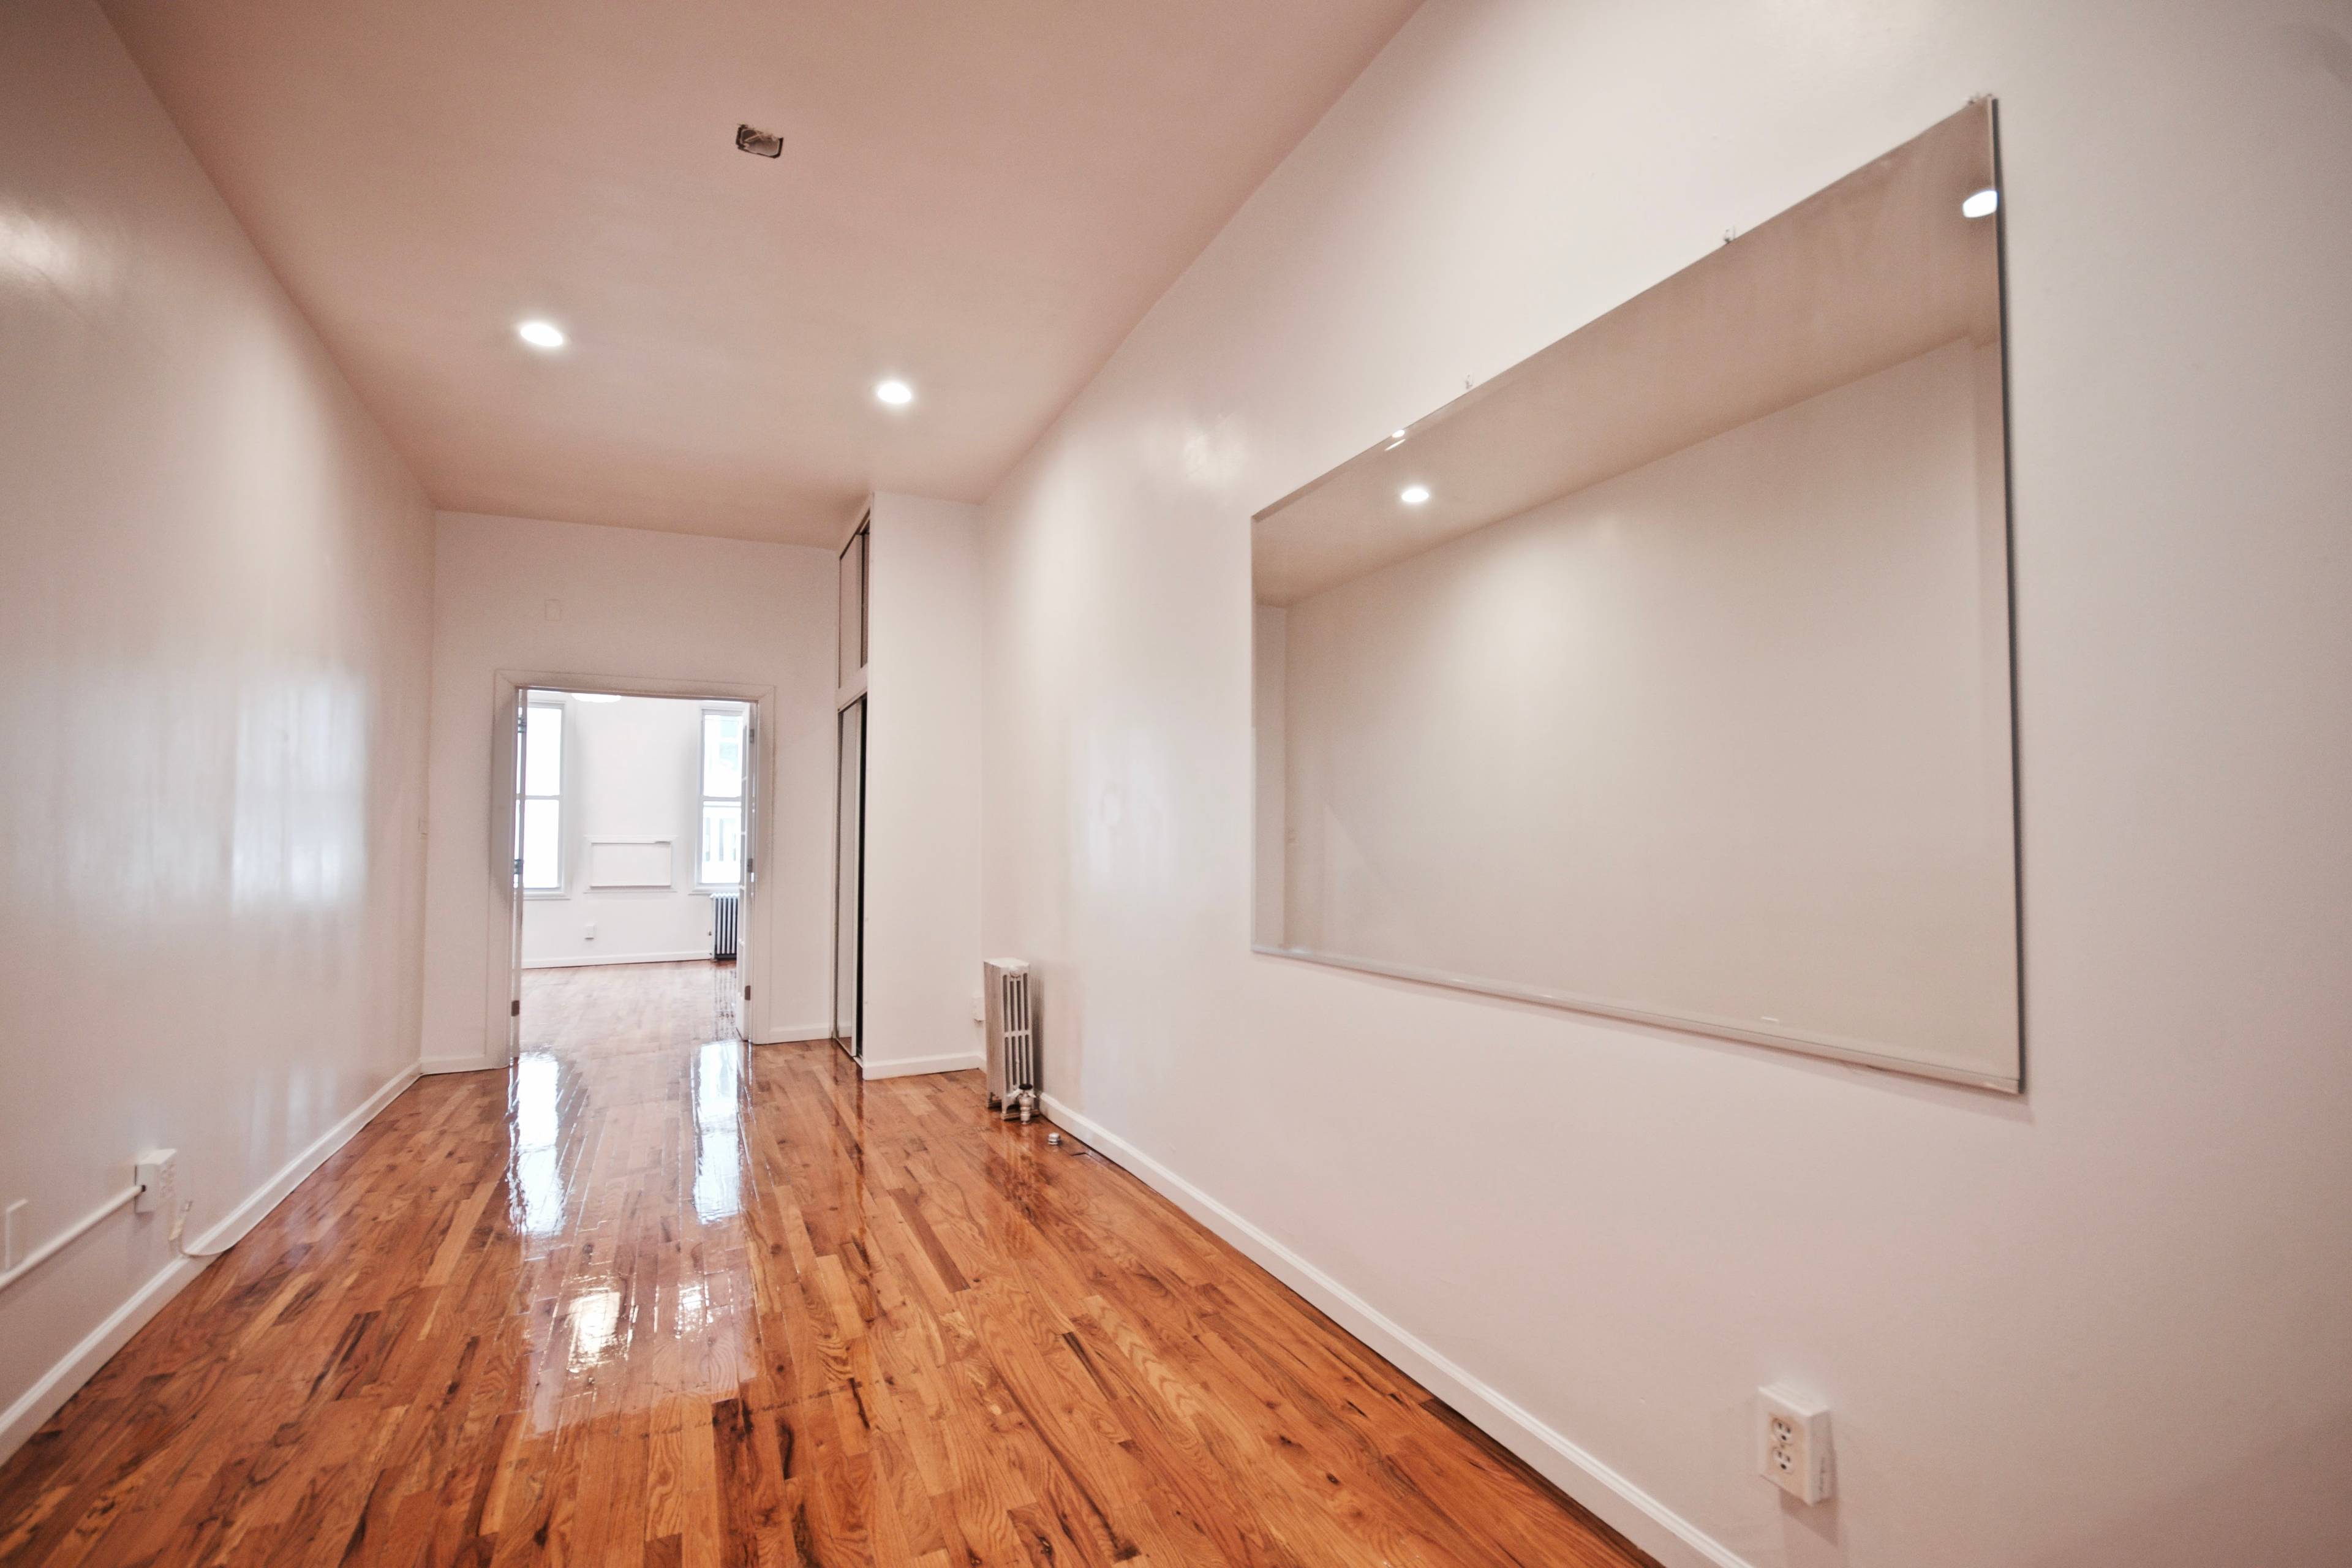 HUMONGOUS, FULLY RENOVATED, RENT STABILIZED  1BR IN THE HEART OF WILLIAMSBURG!